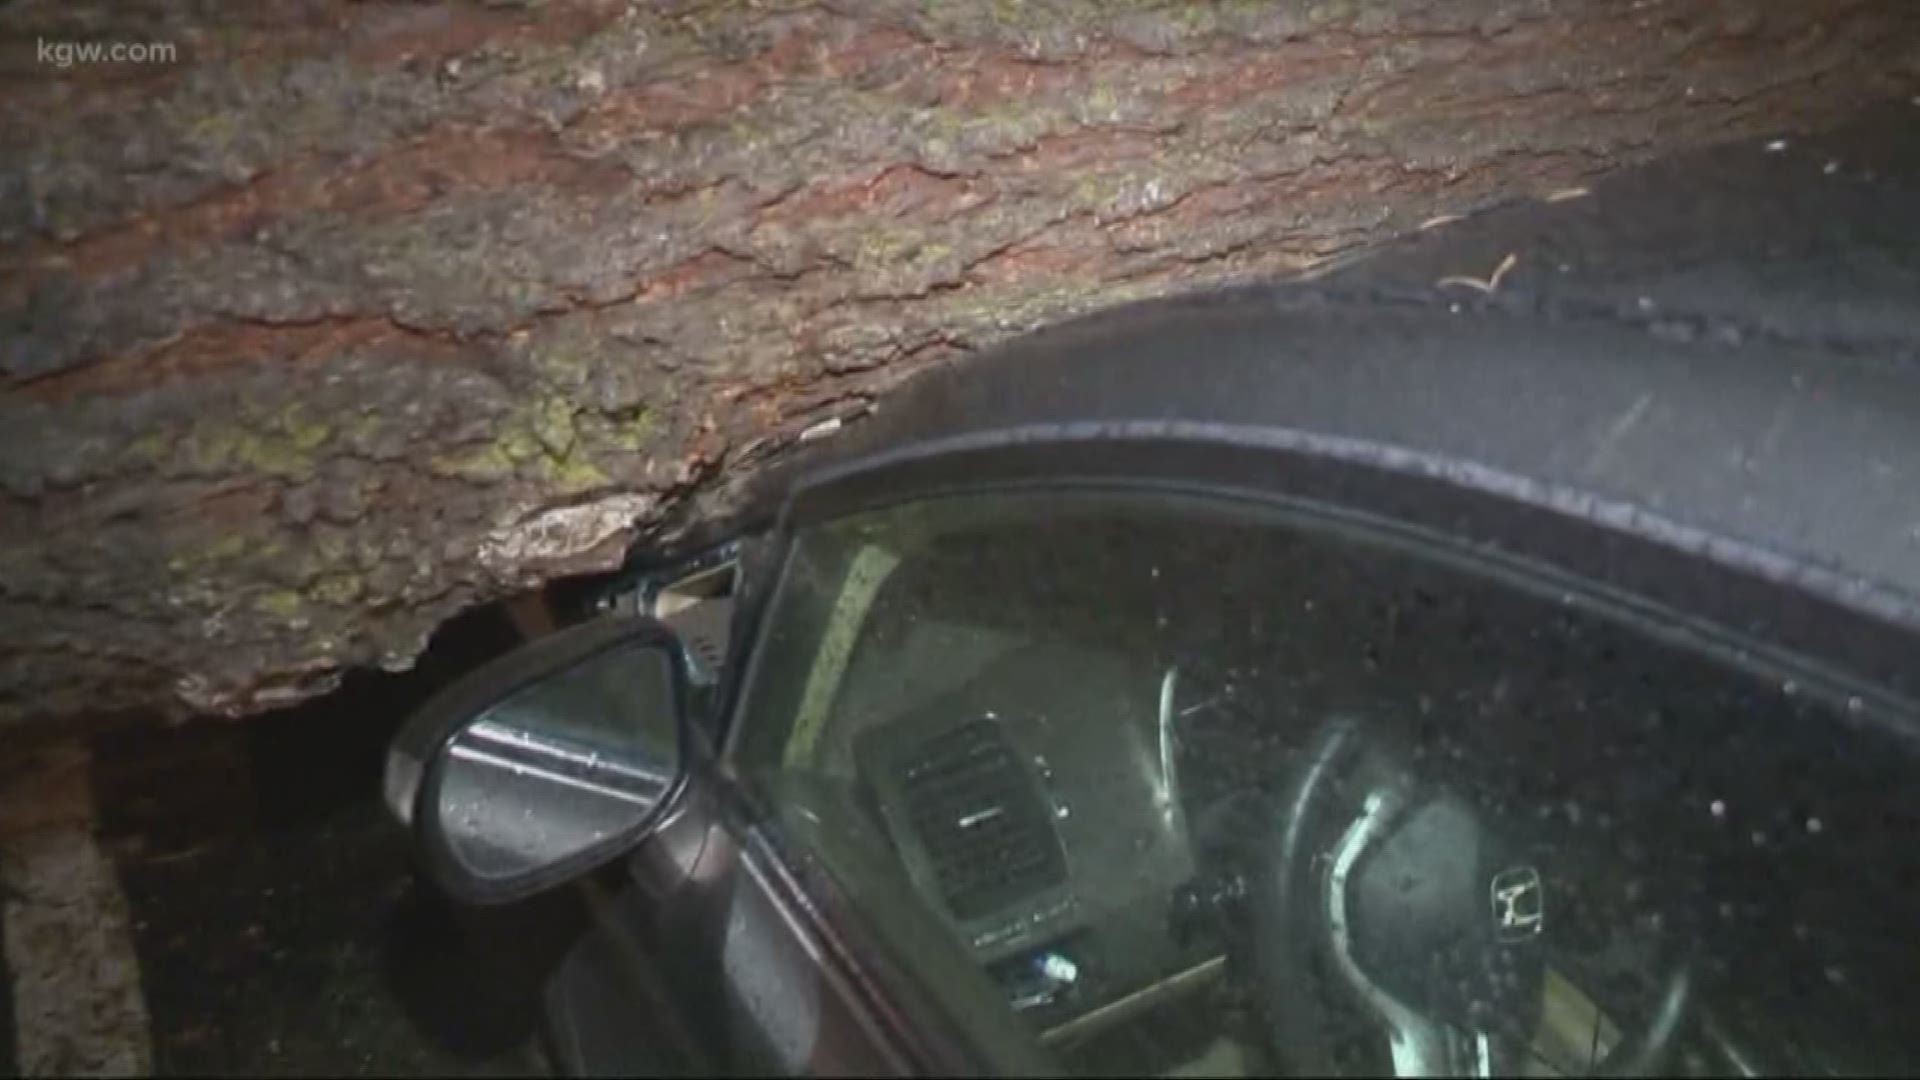 Strong winds cause power outages and damage across KGW viewing area.